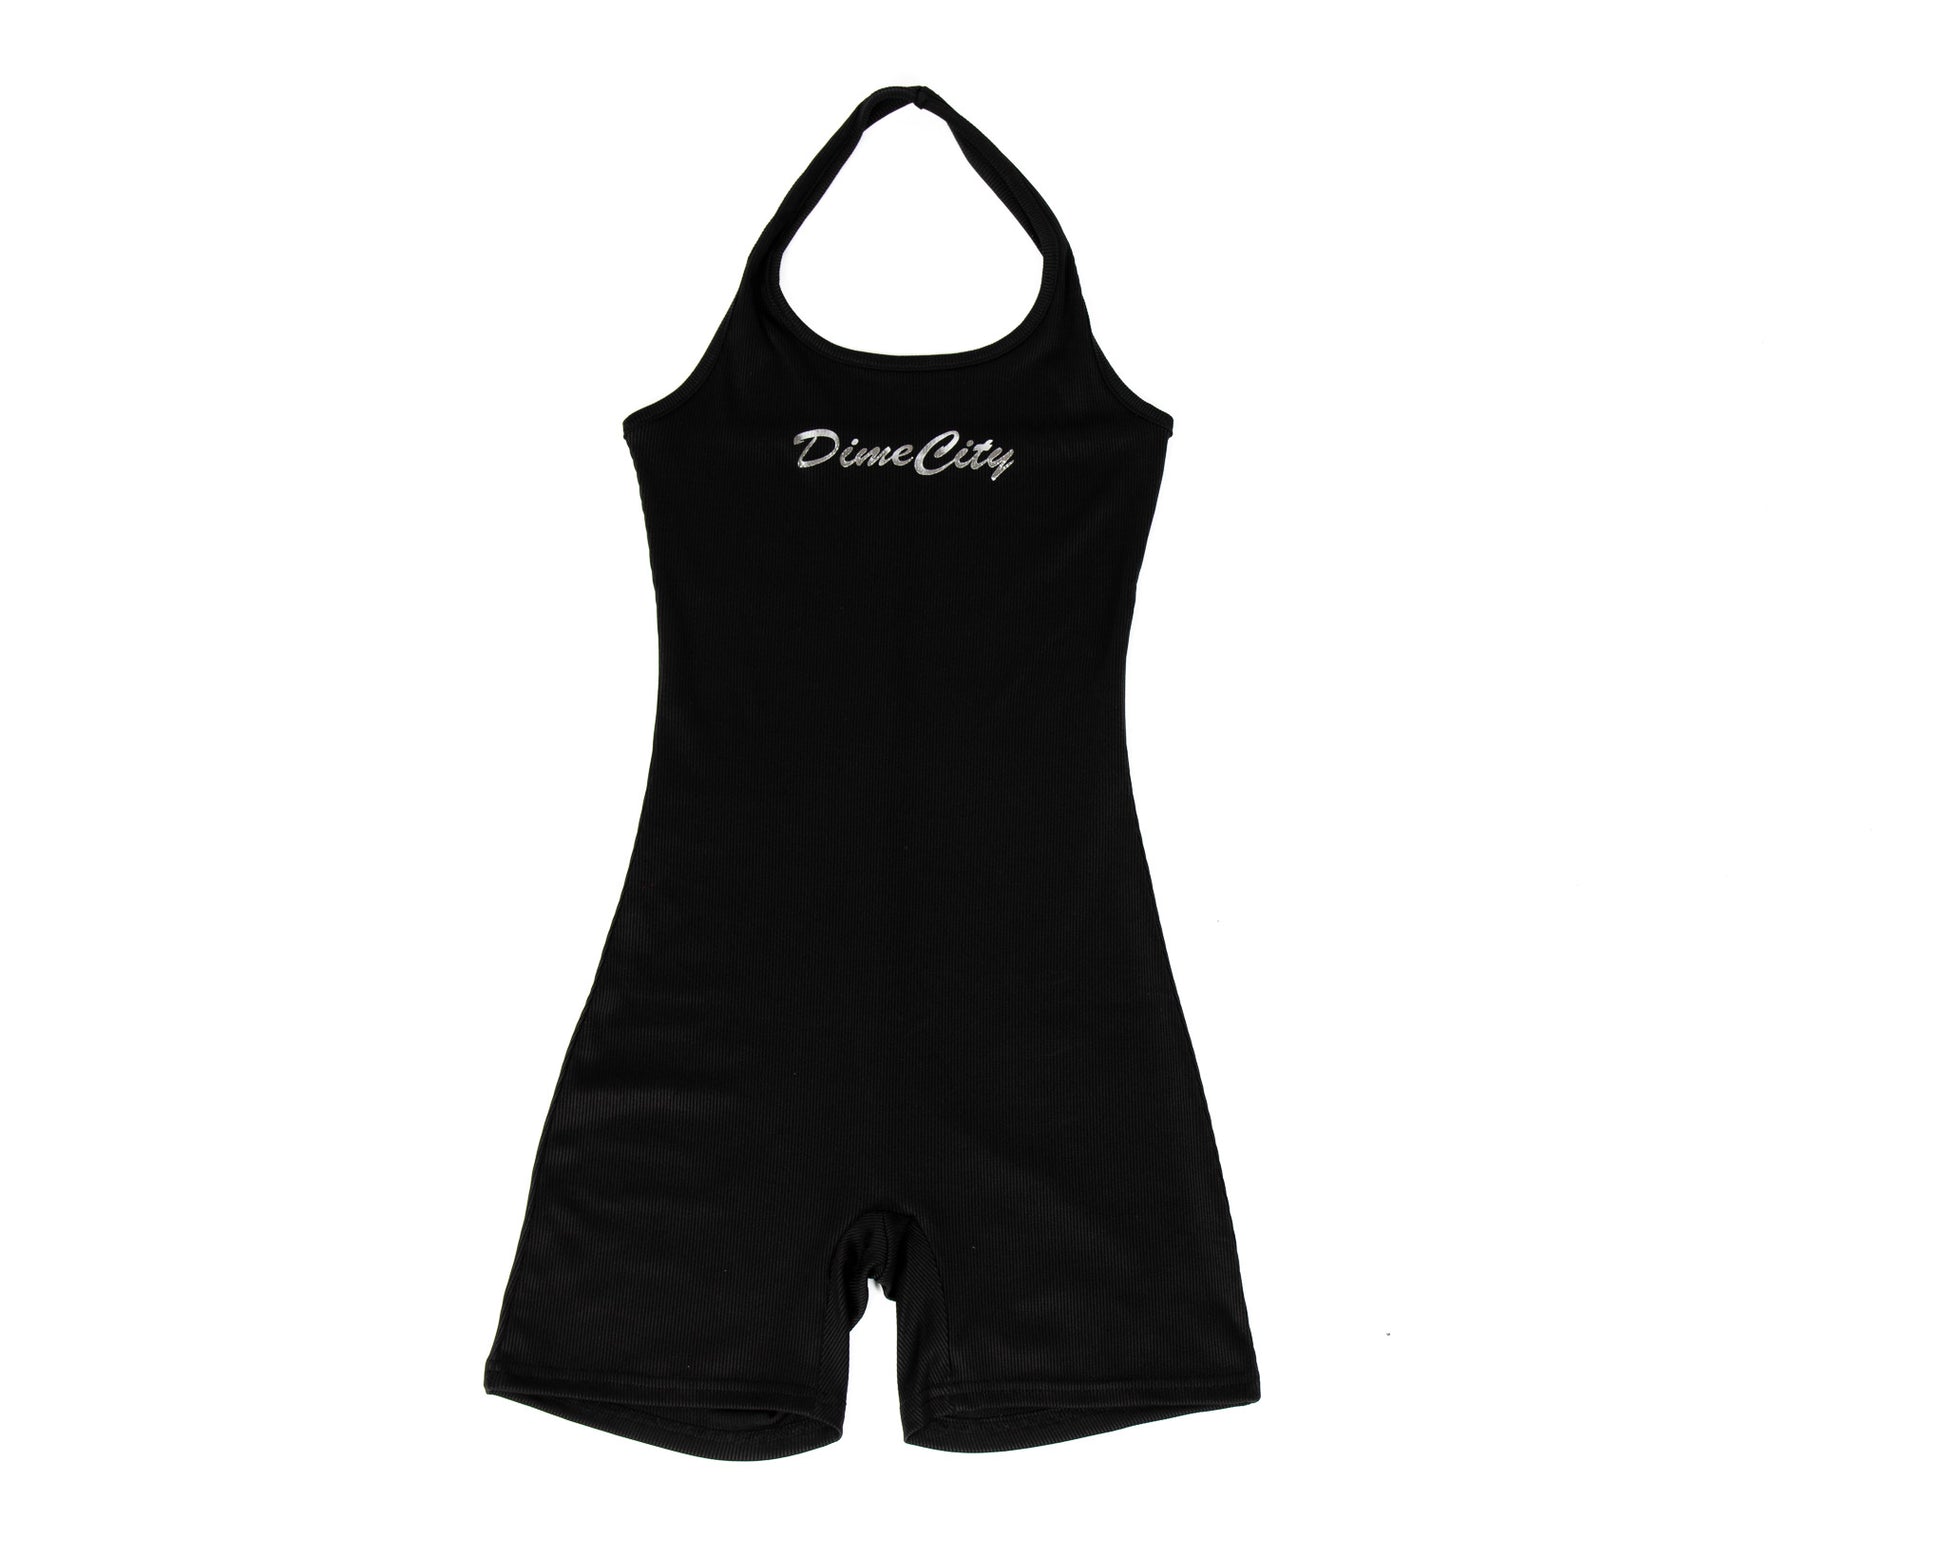 Woman's Luxury Romper by Dime City Apparel